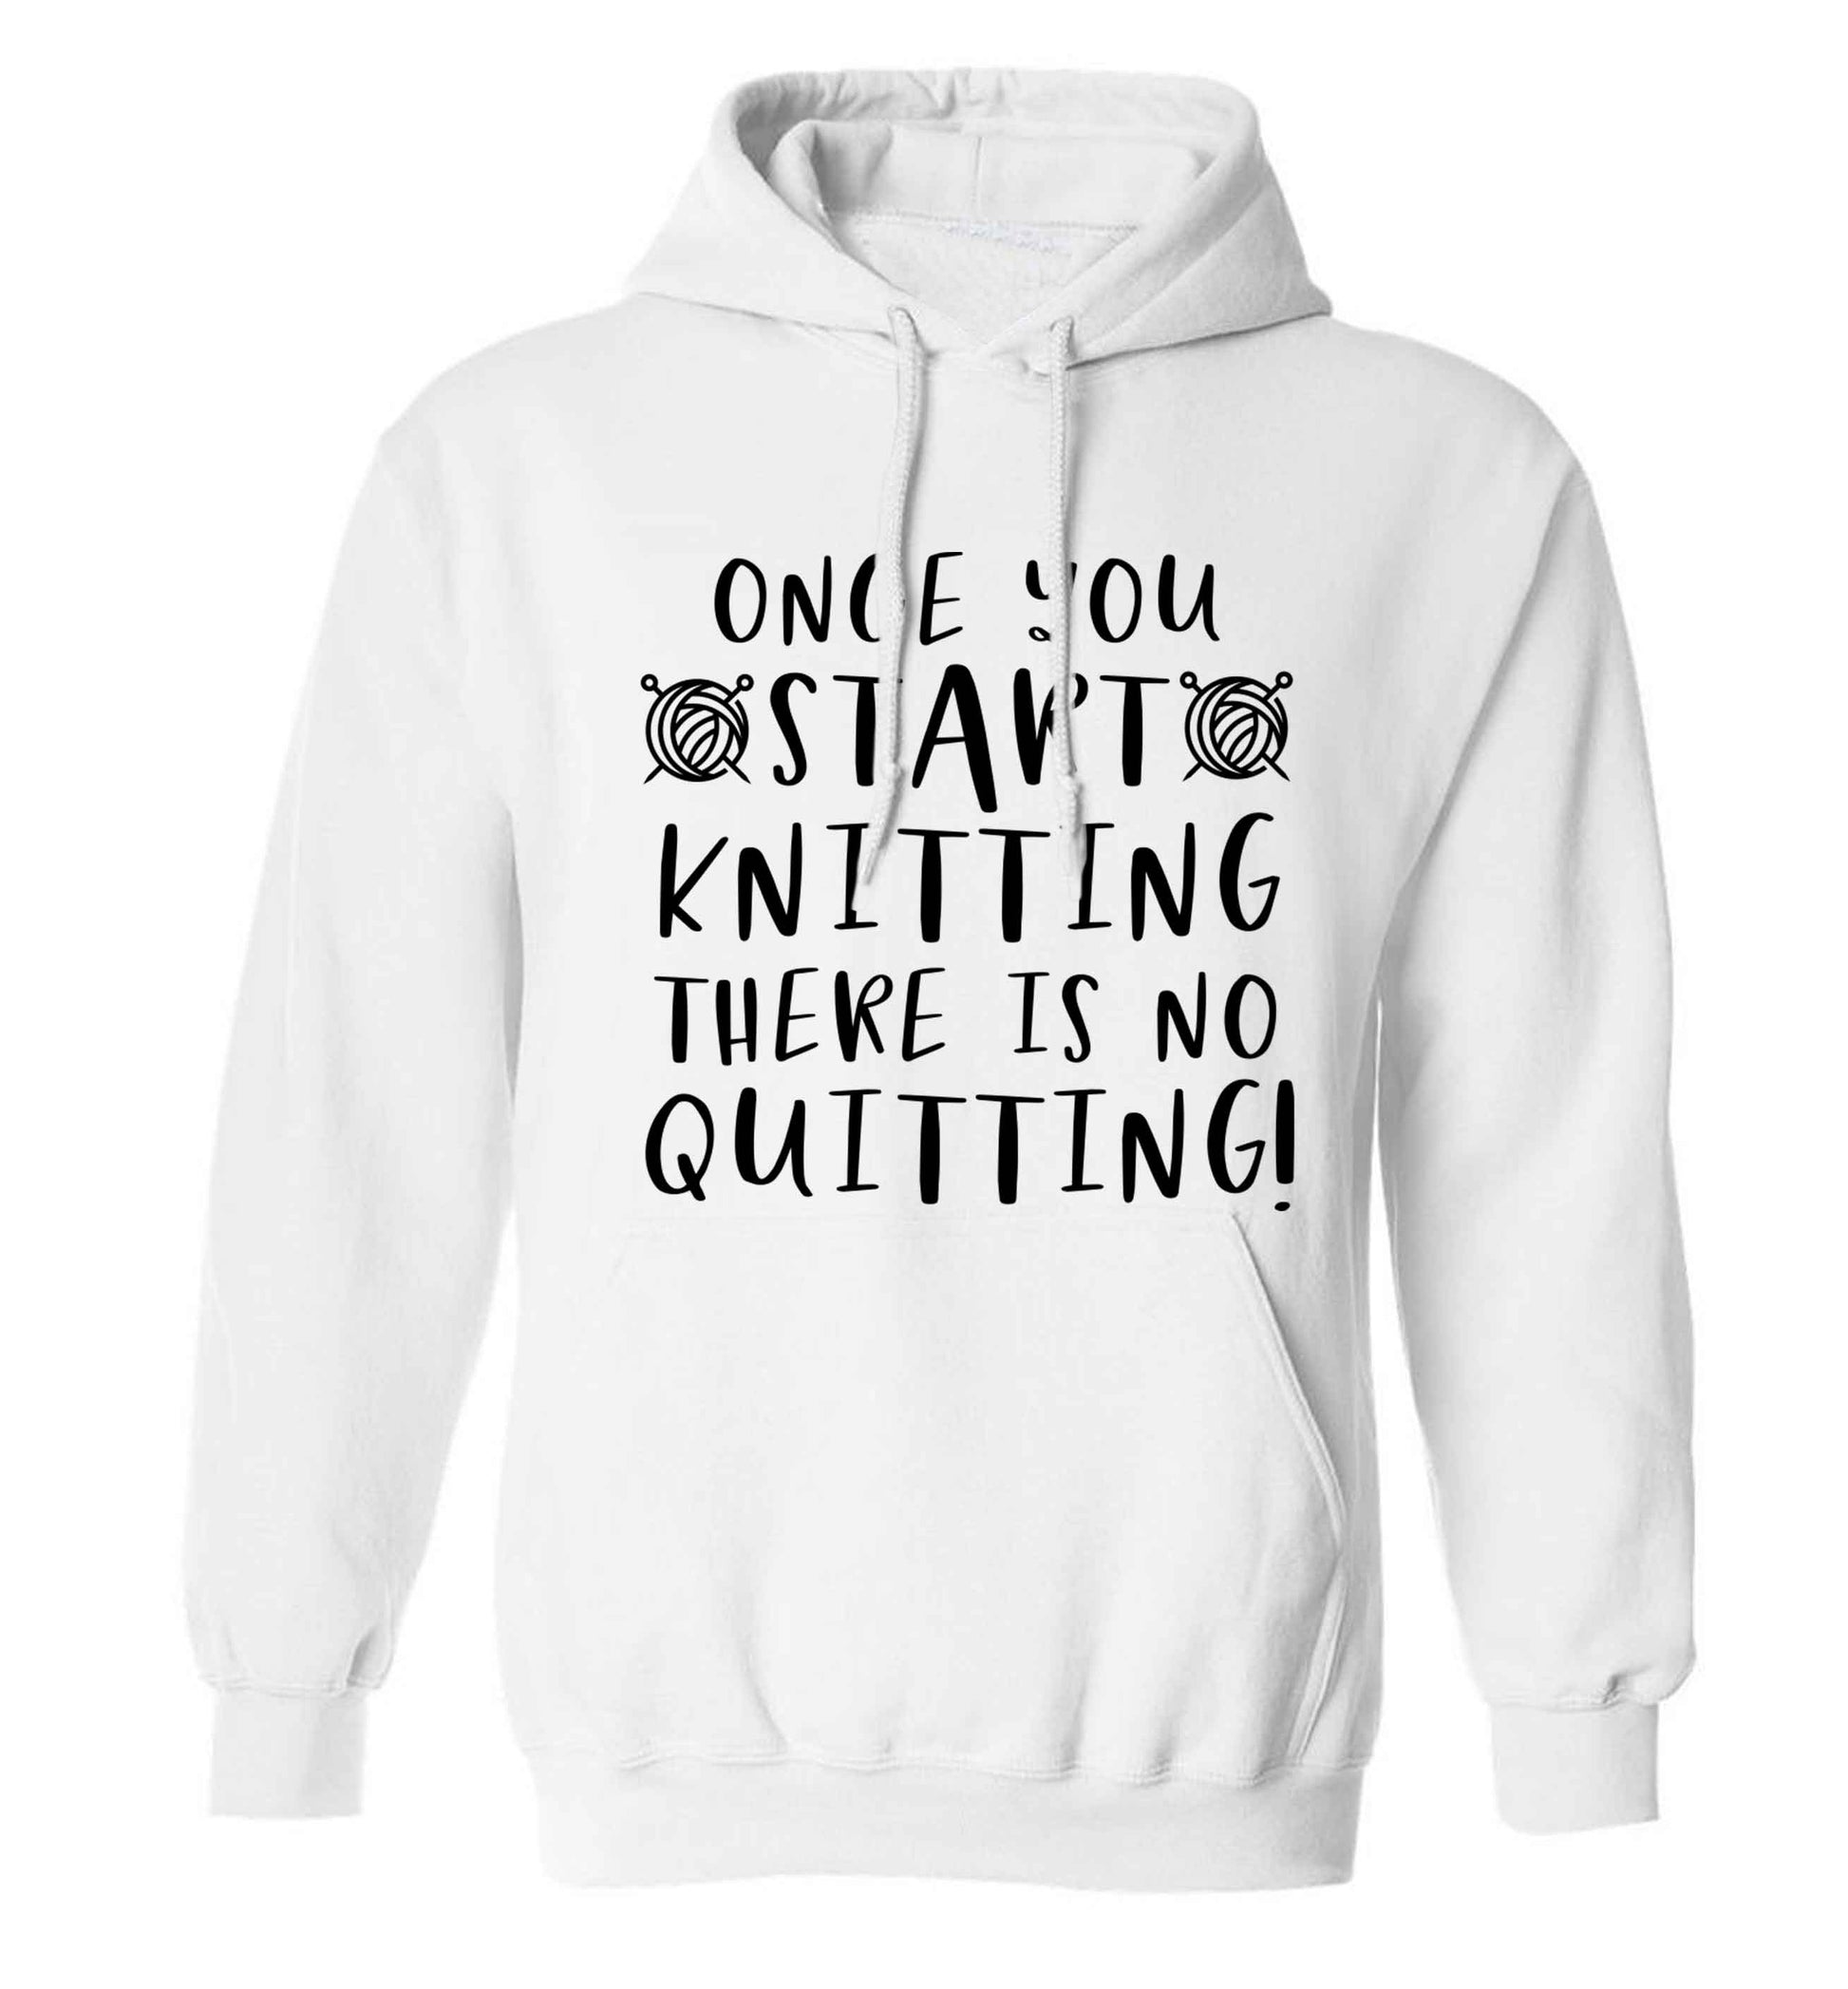 Once you start knitting there is no quitting! adults unisex white hoodie 2XL